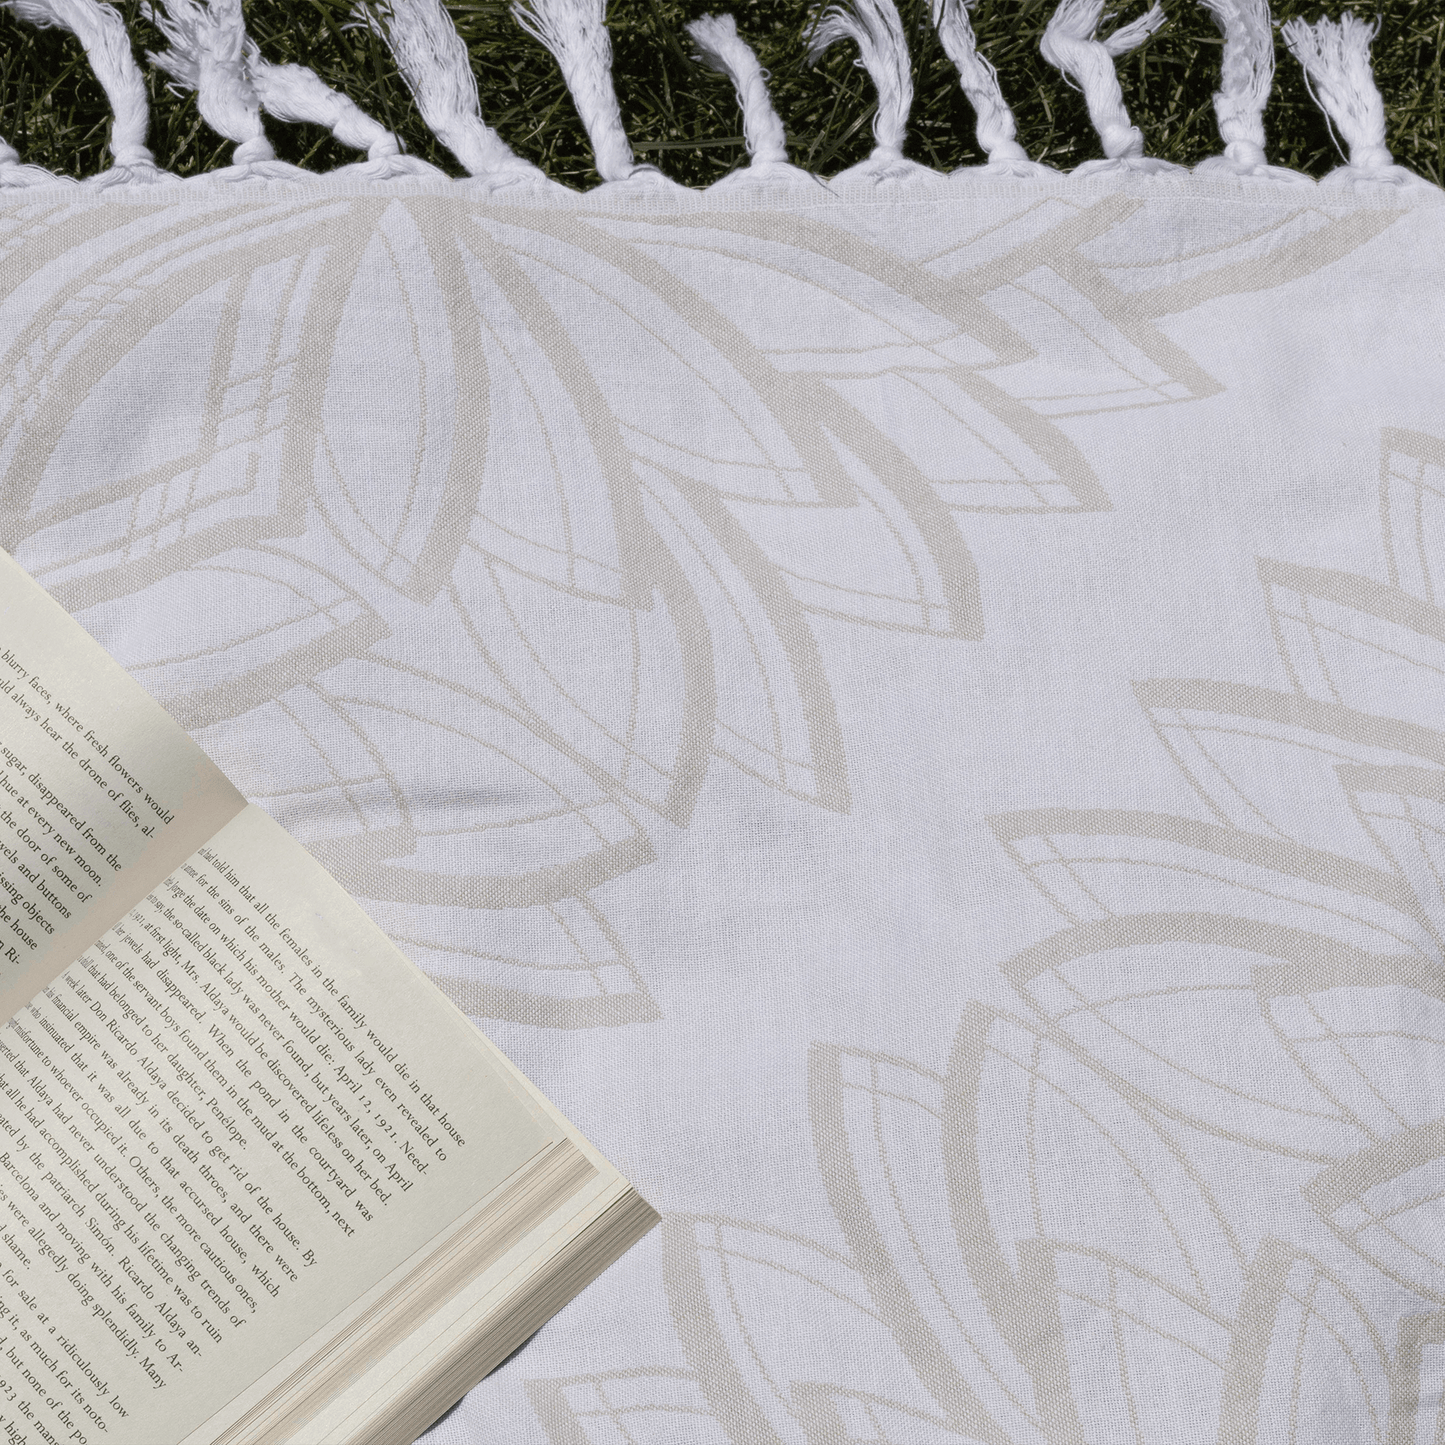 Turkish towel used for summer sunbathing with an open book